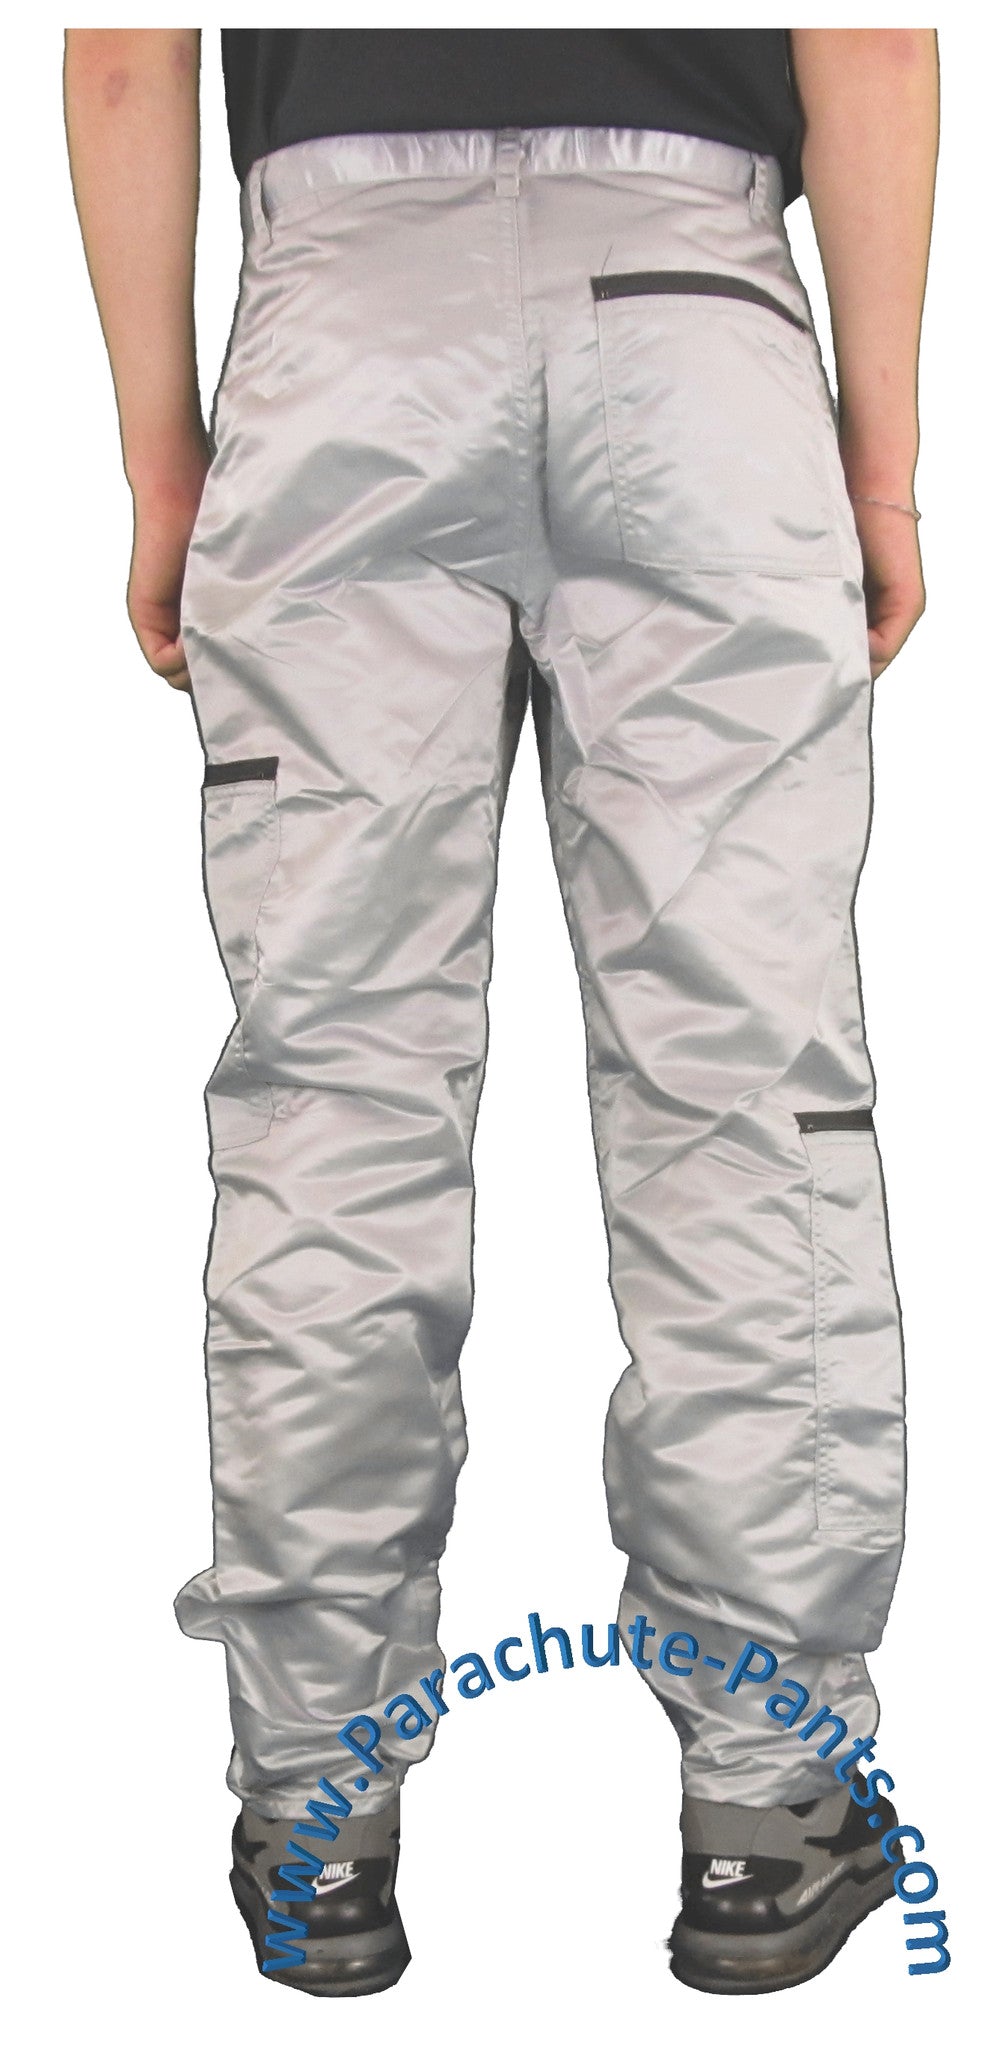 Panno D'Or Grey Nylon Parachute Pants with Black Zippers | The ...